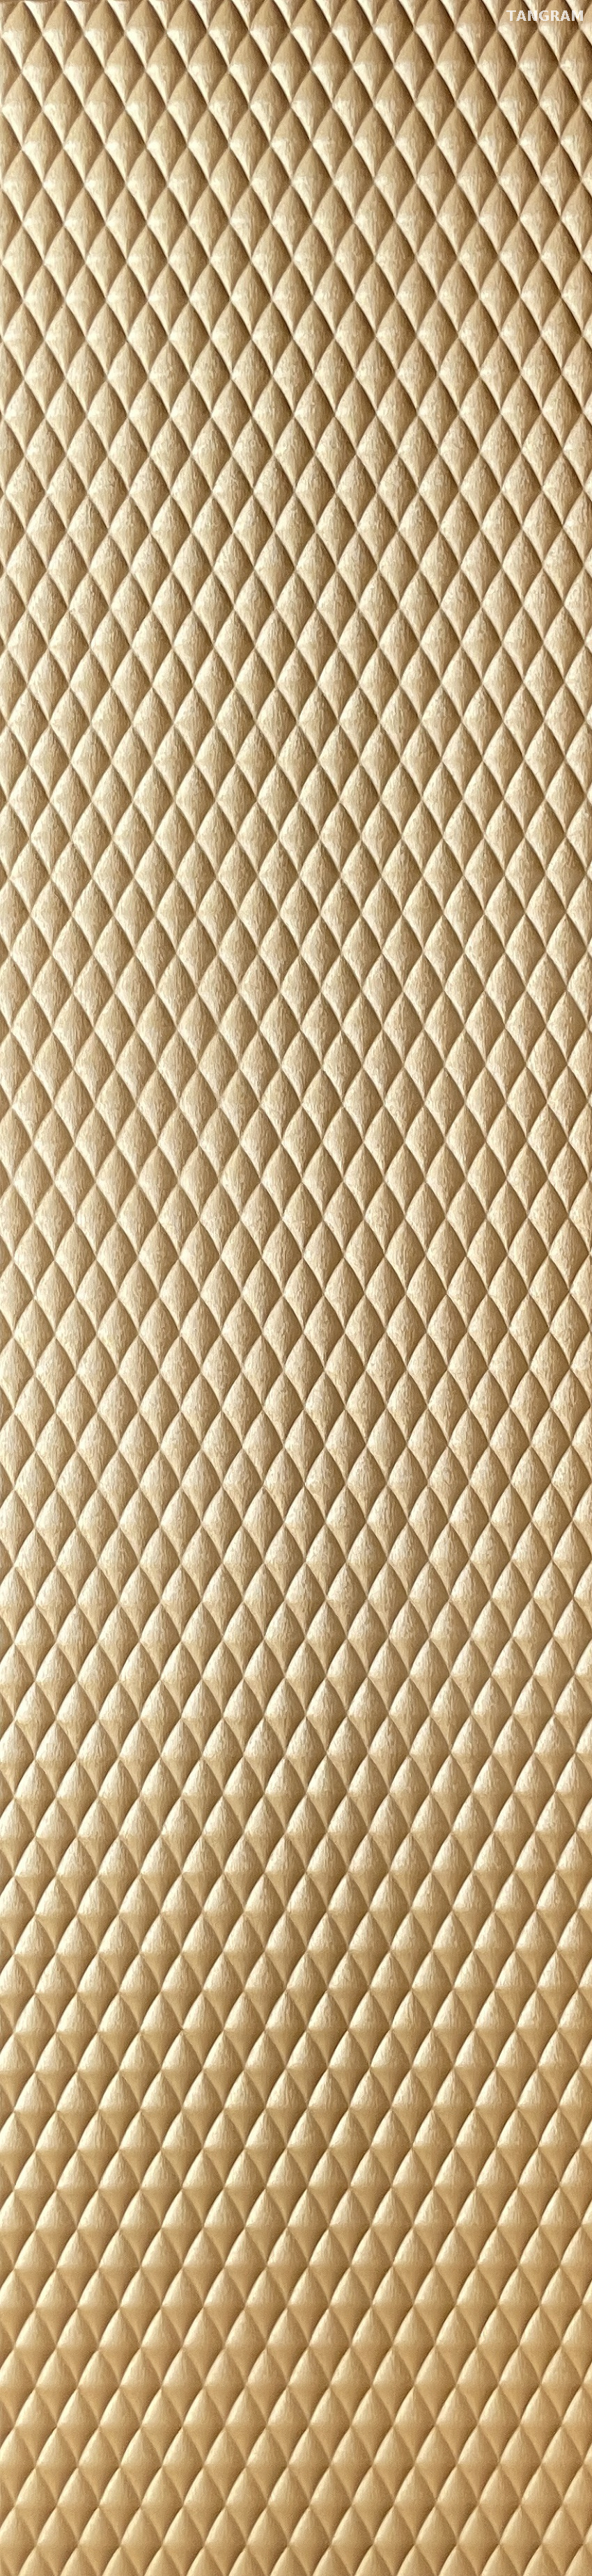 Biodegradable 100% Recycled Indoor Big Wall Panel